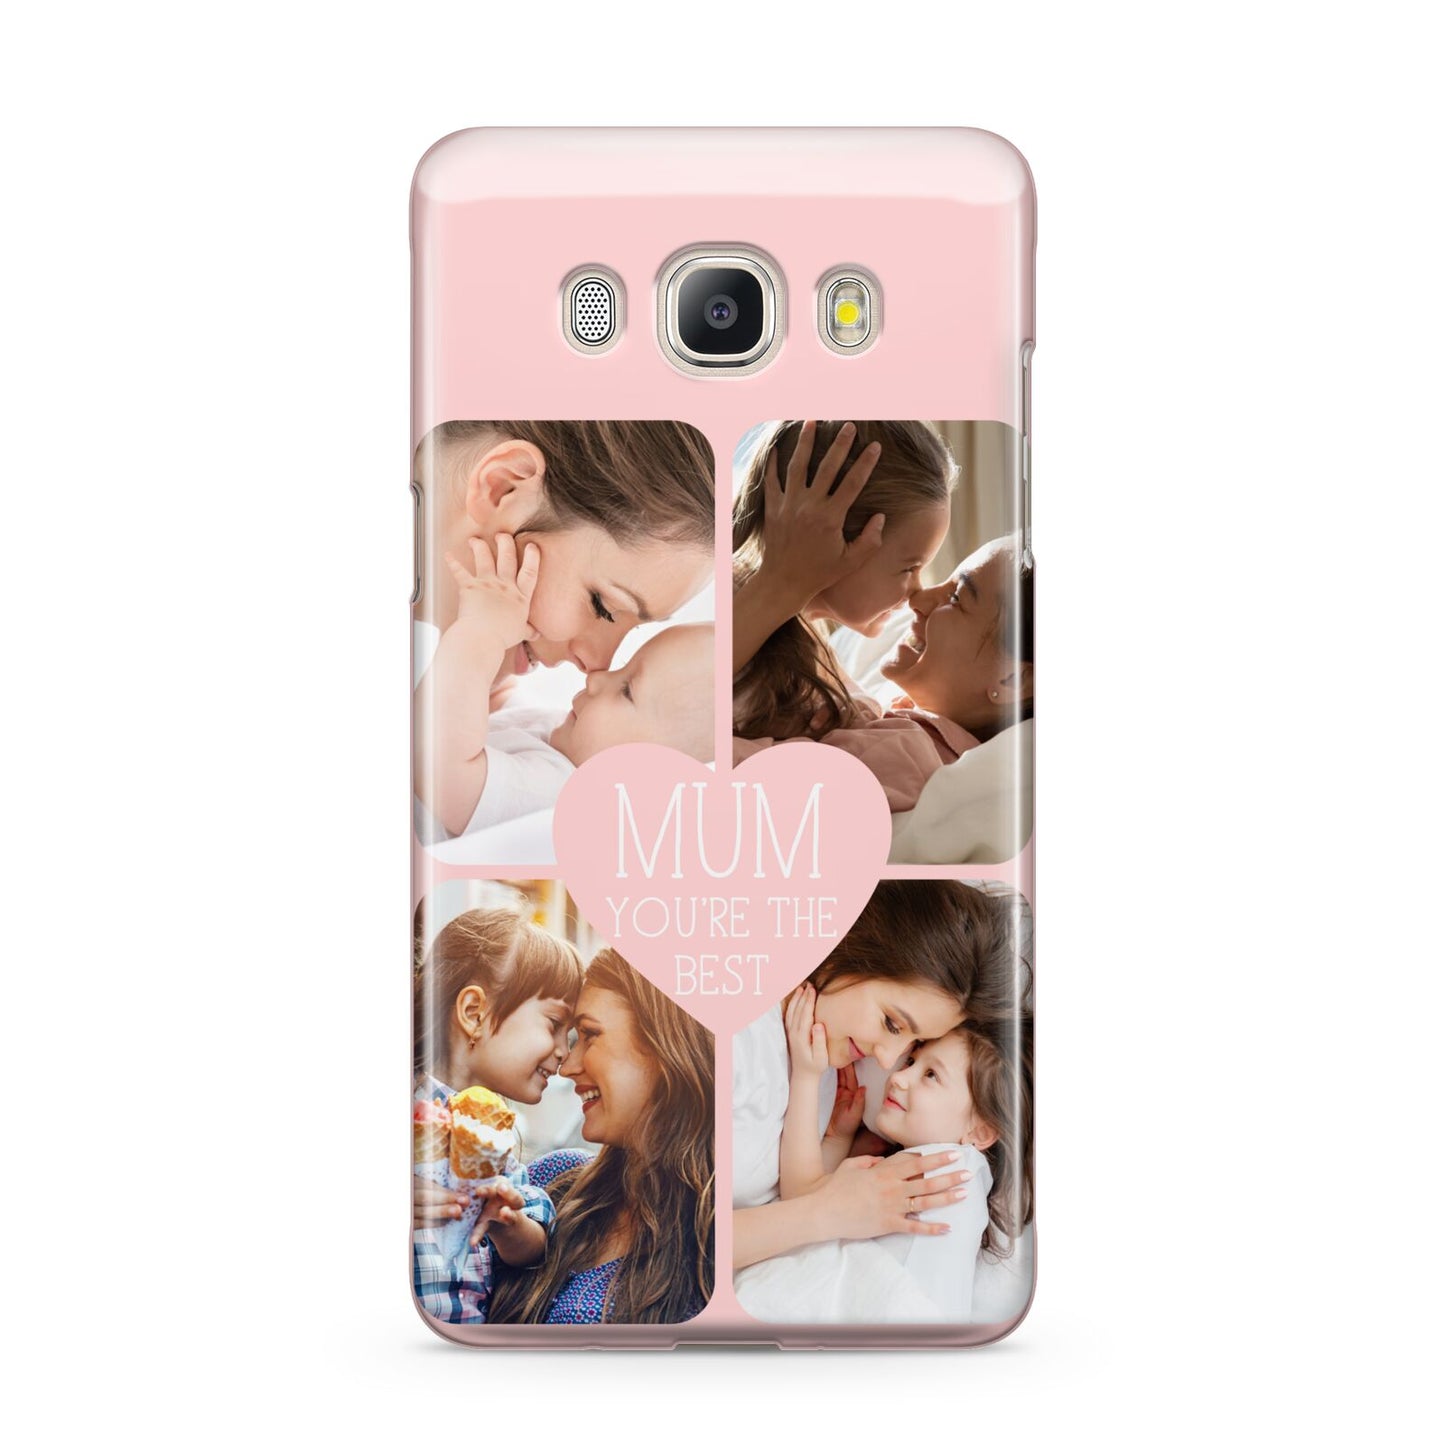 Mothers Day Four Photo Upload Samsung Galaxy J5 2016 Case